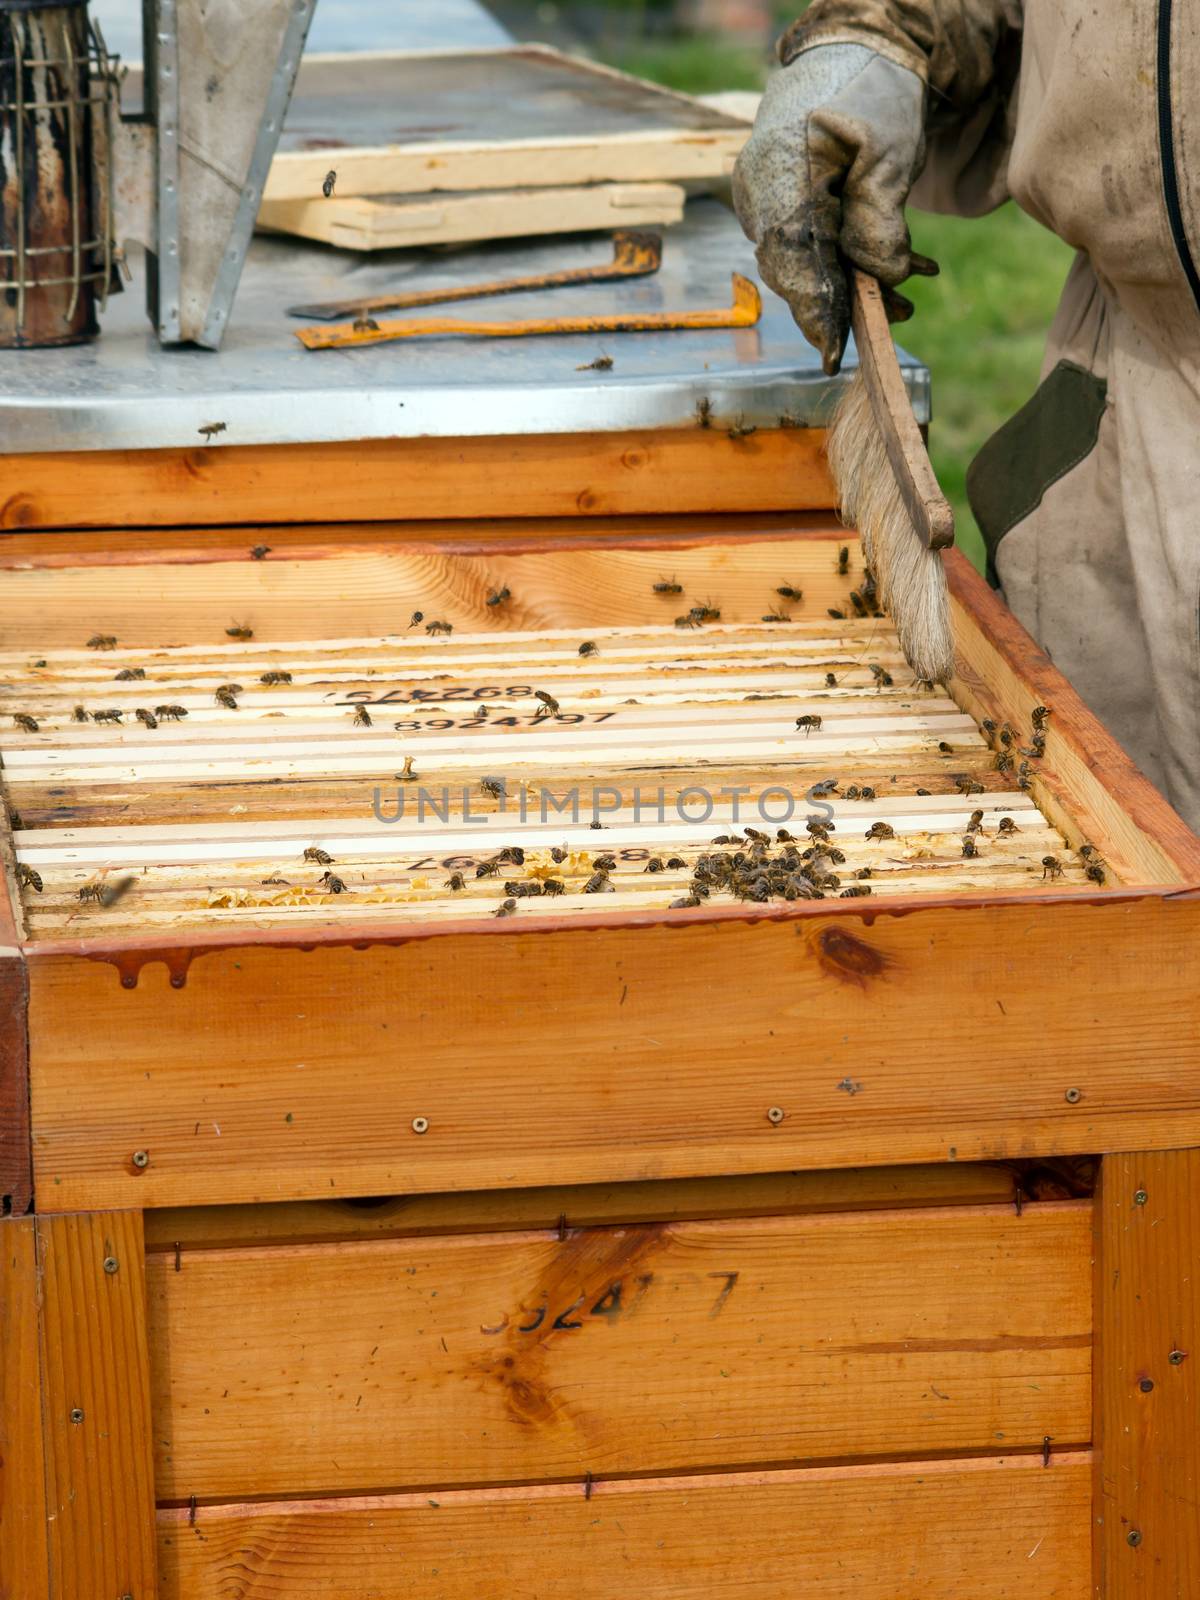 Bees prepare a delicious honey in the hives.